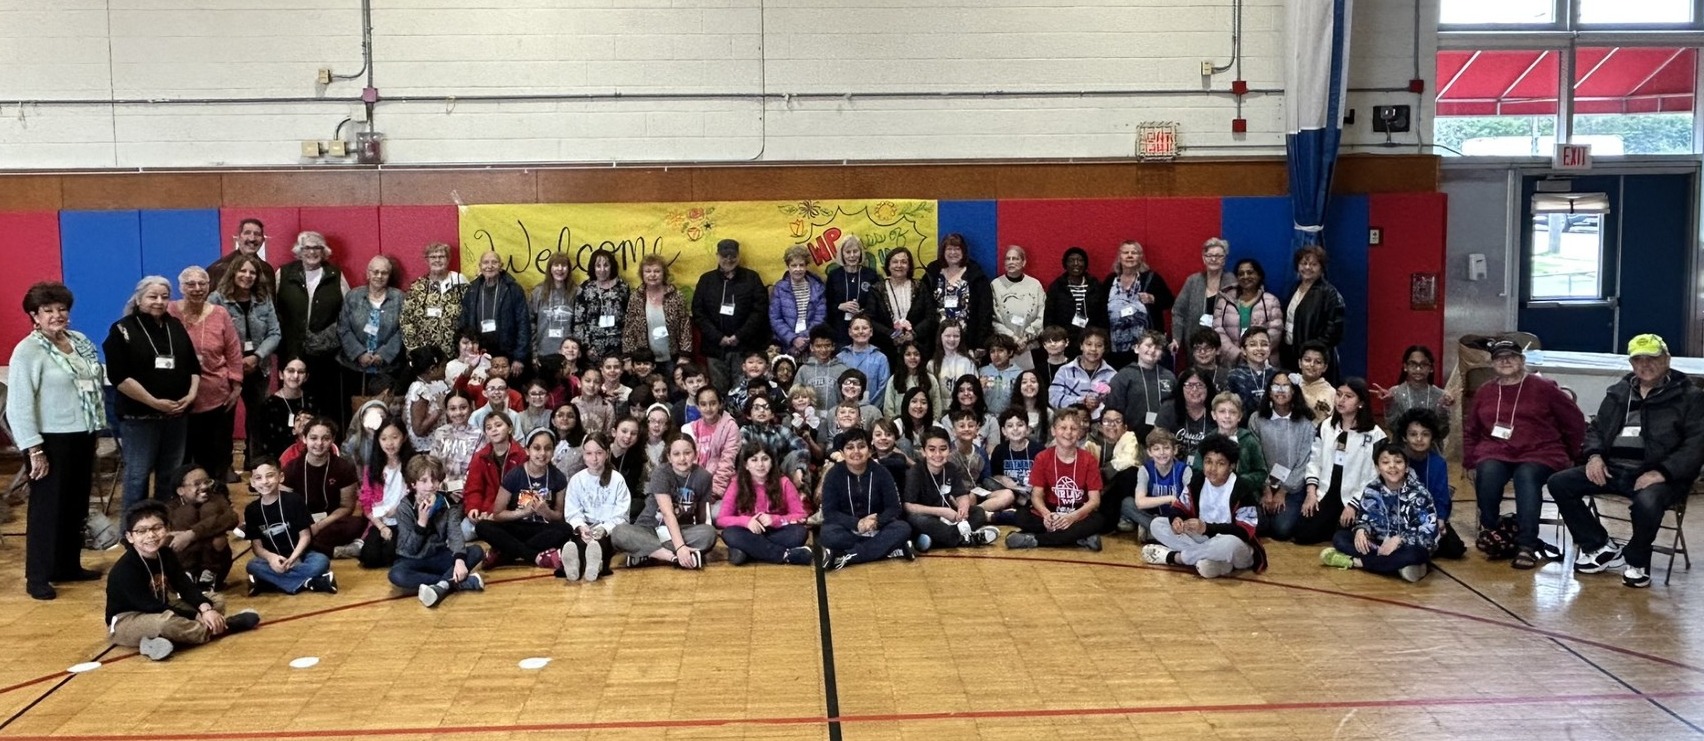 fourth grade students and seniors posing in the school gymnasium